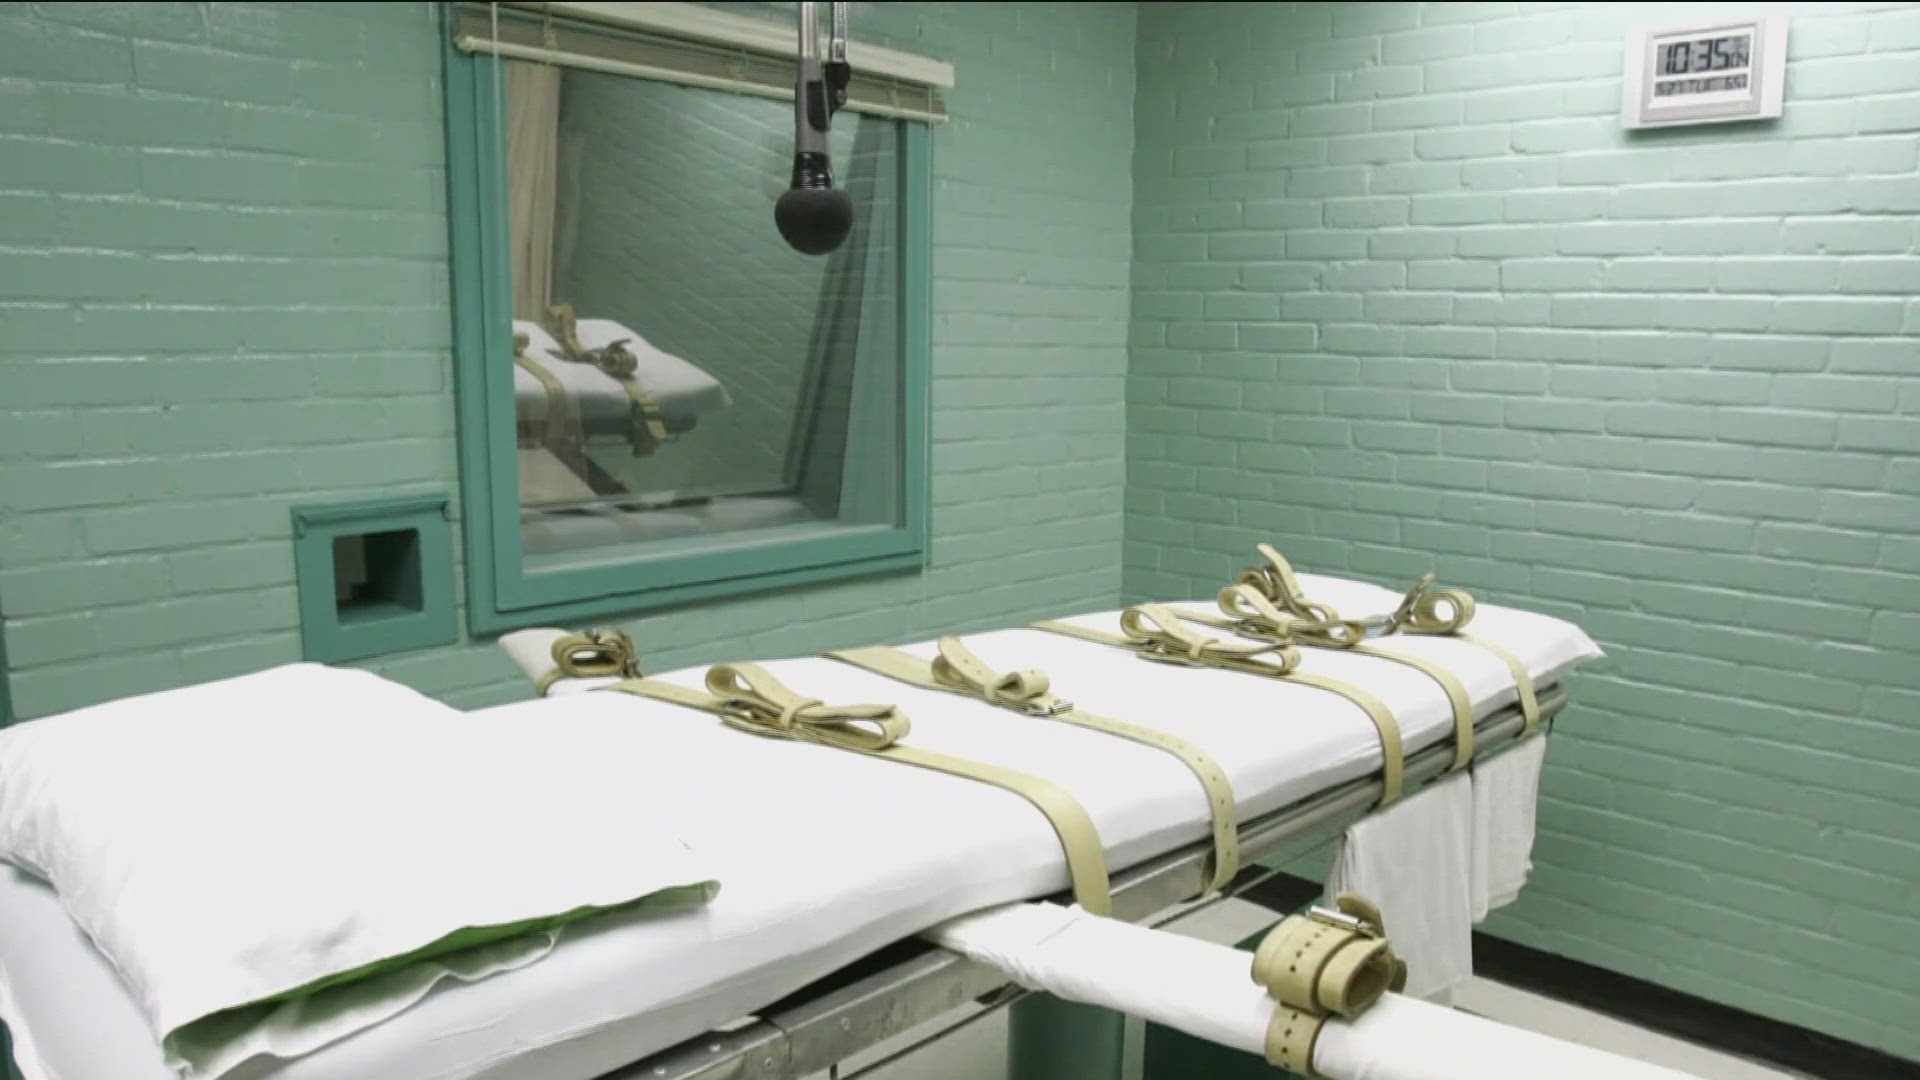 Right now, 118 inmates are on death row, according to the Ohio Department of Rehabilitation and Correction. A bill in the Ohio House would offer a gas alternative.